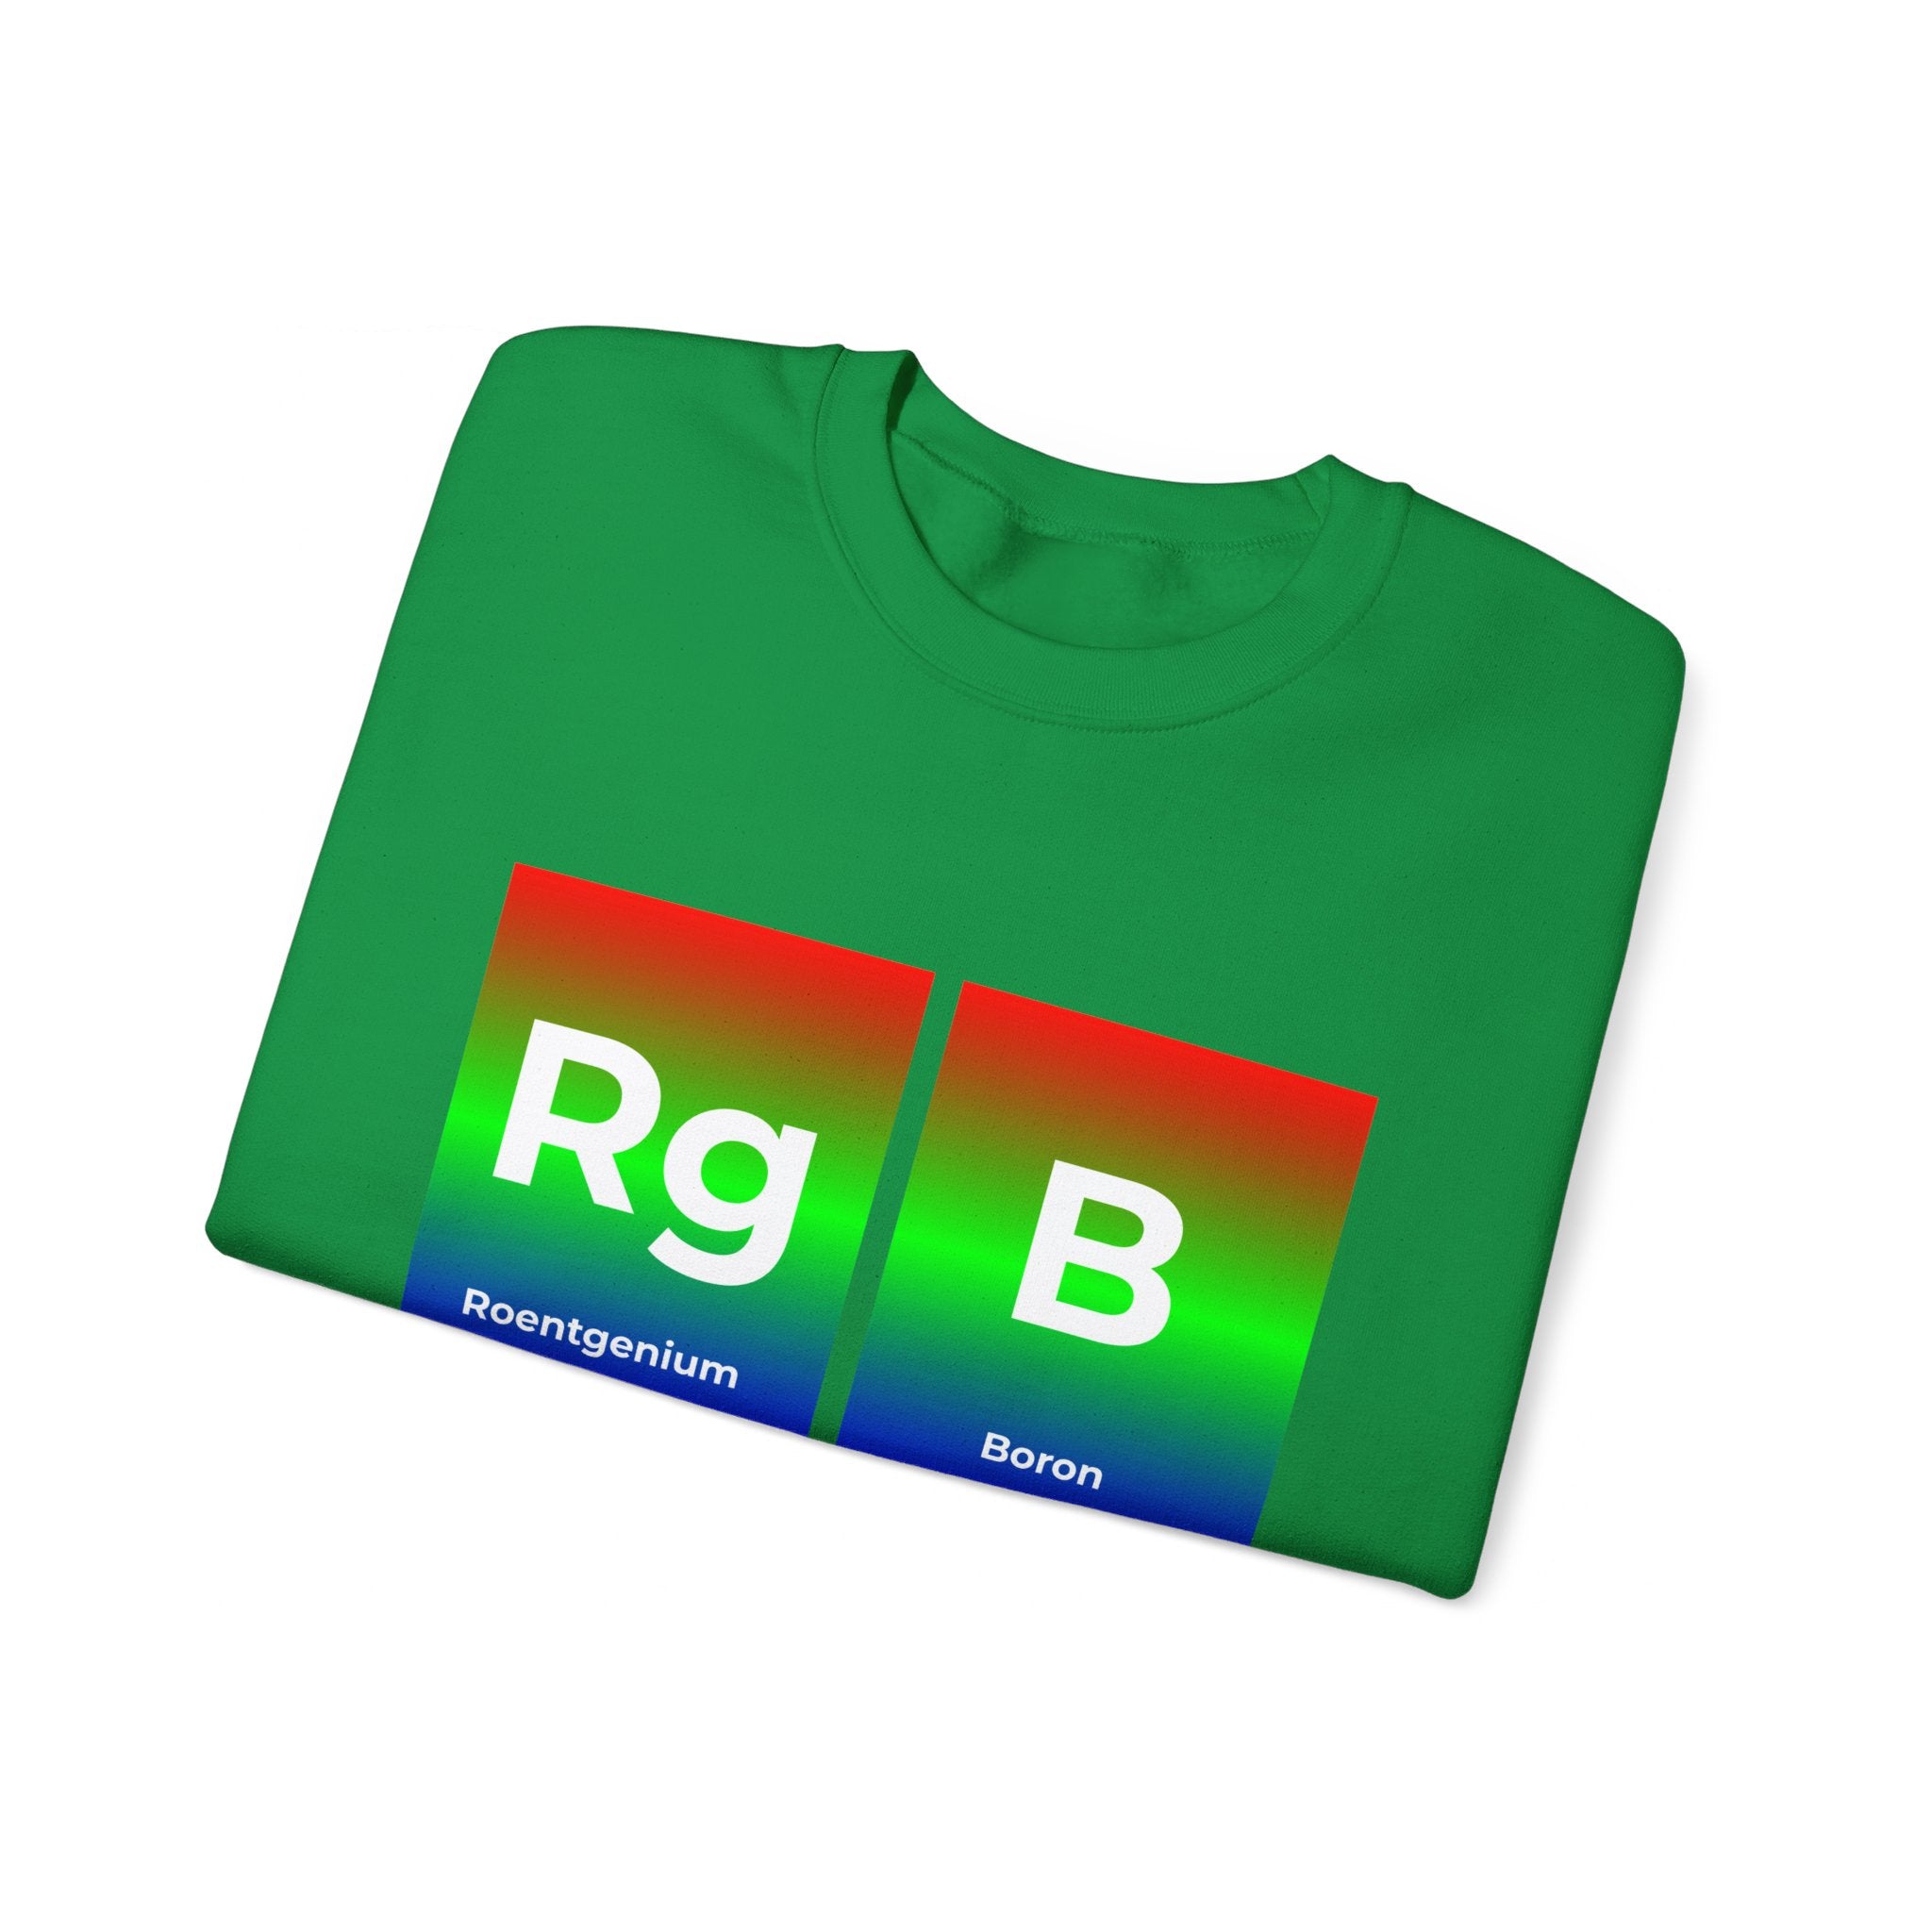 Green RG-B - Sweatshirt featuring a stylish design that resembles periodic table elements with "Rg" for Roentgenium and "B" for Boron, each shaded in a gradient of red, green, and blue. Perfect for comfort lovers who appreciate unique fashion statements.